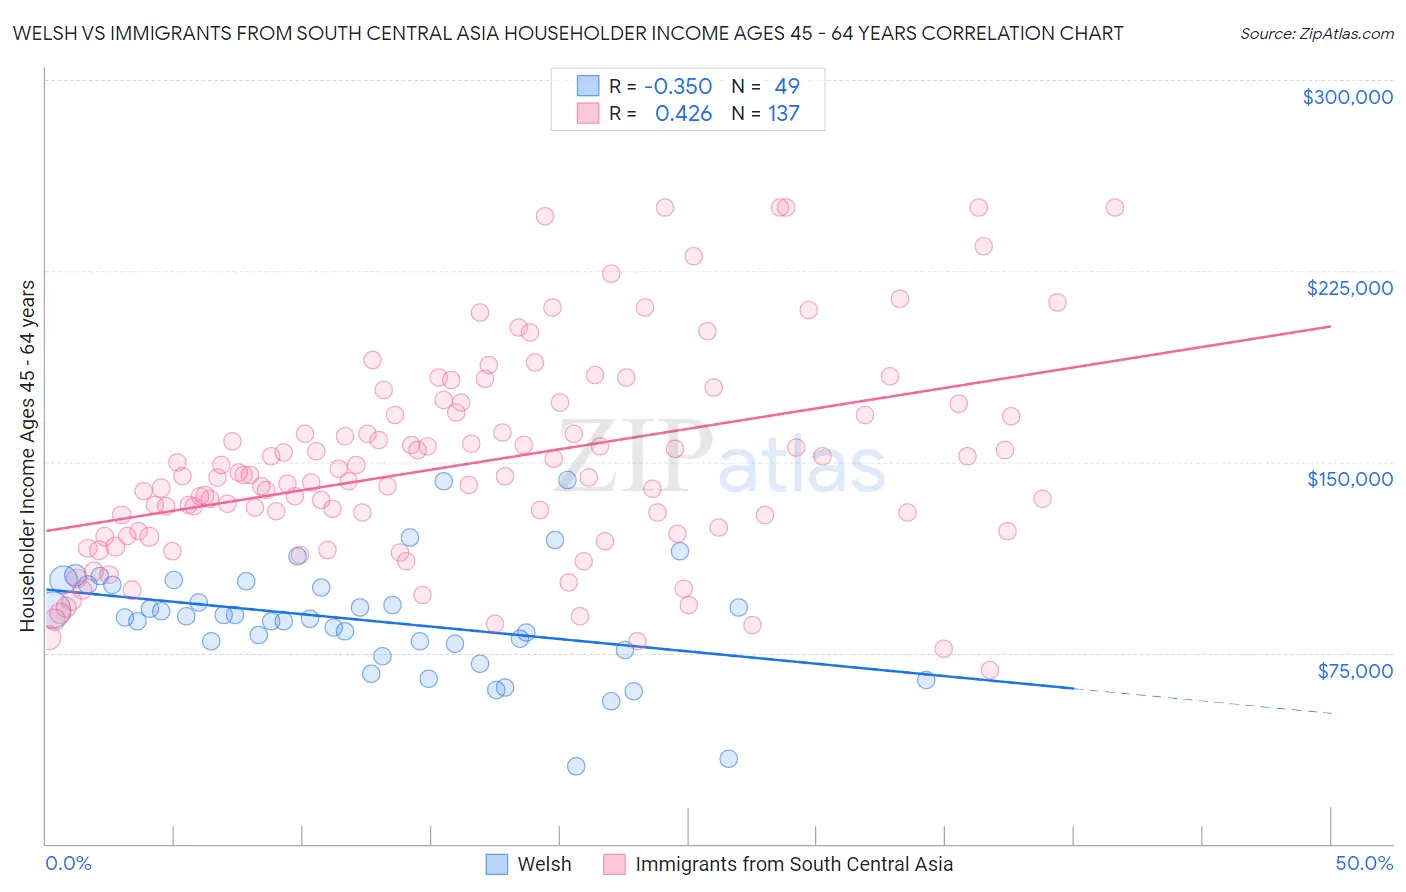 Welsh vs Immigrants from South Central Asia Householder Income Ages 45 - 64 years